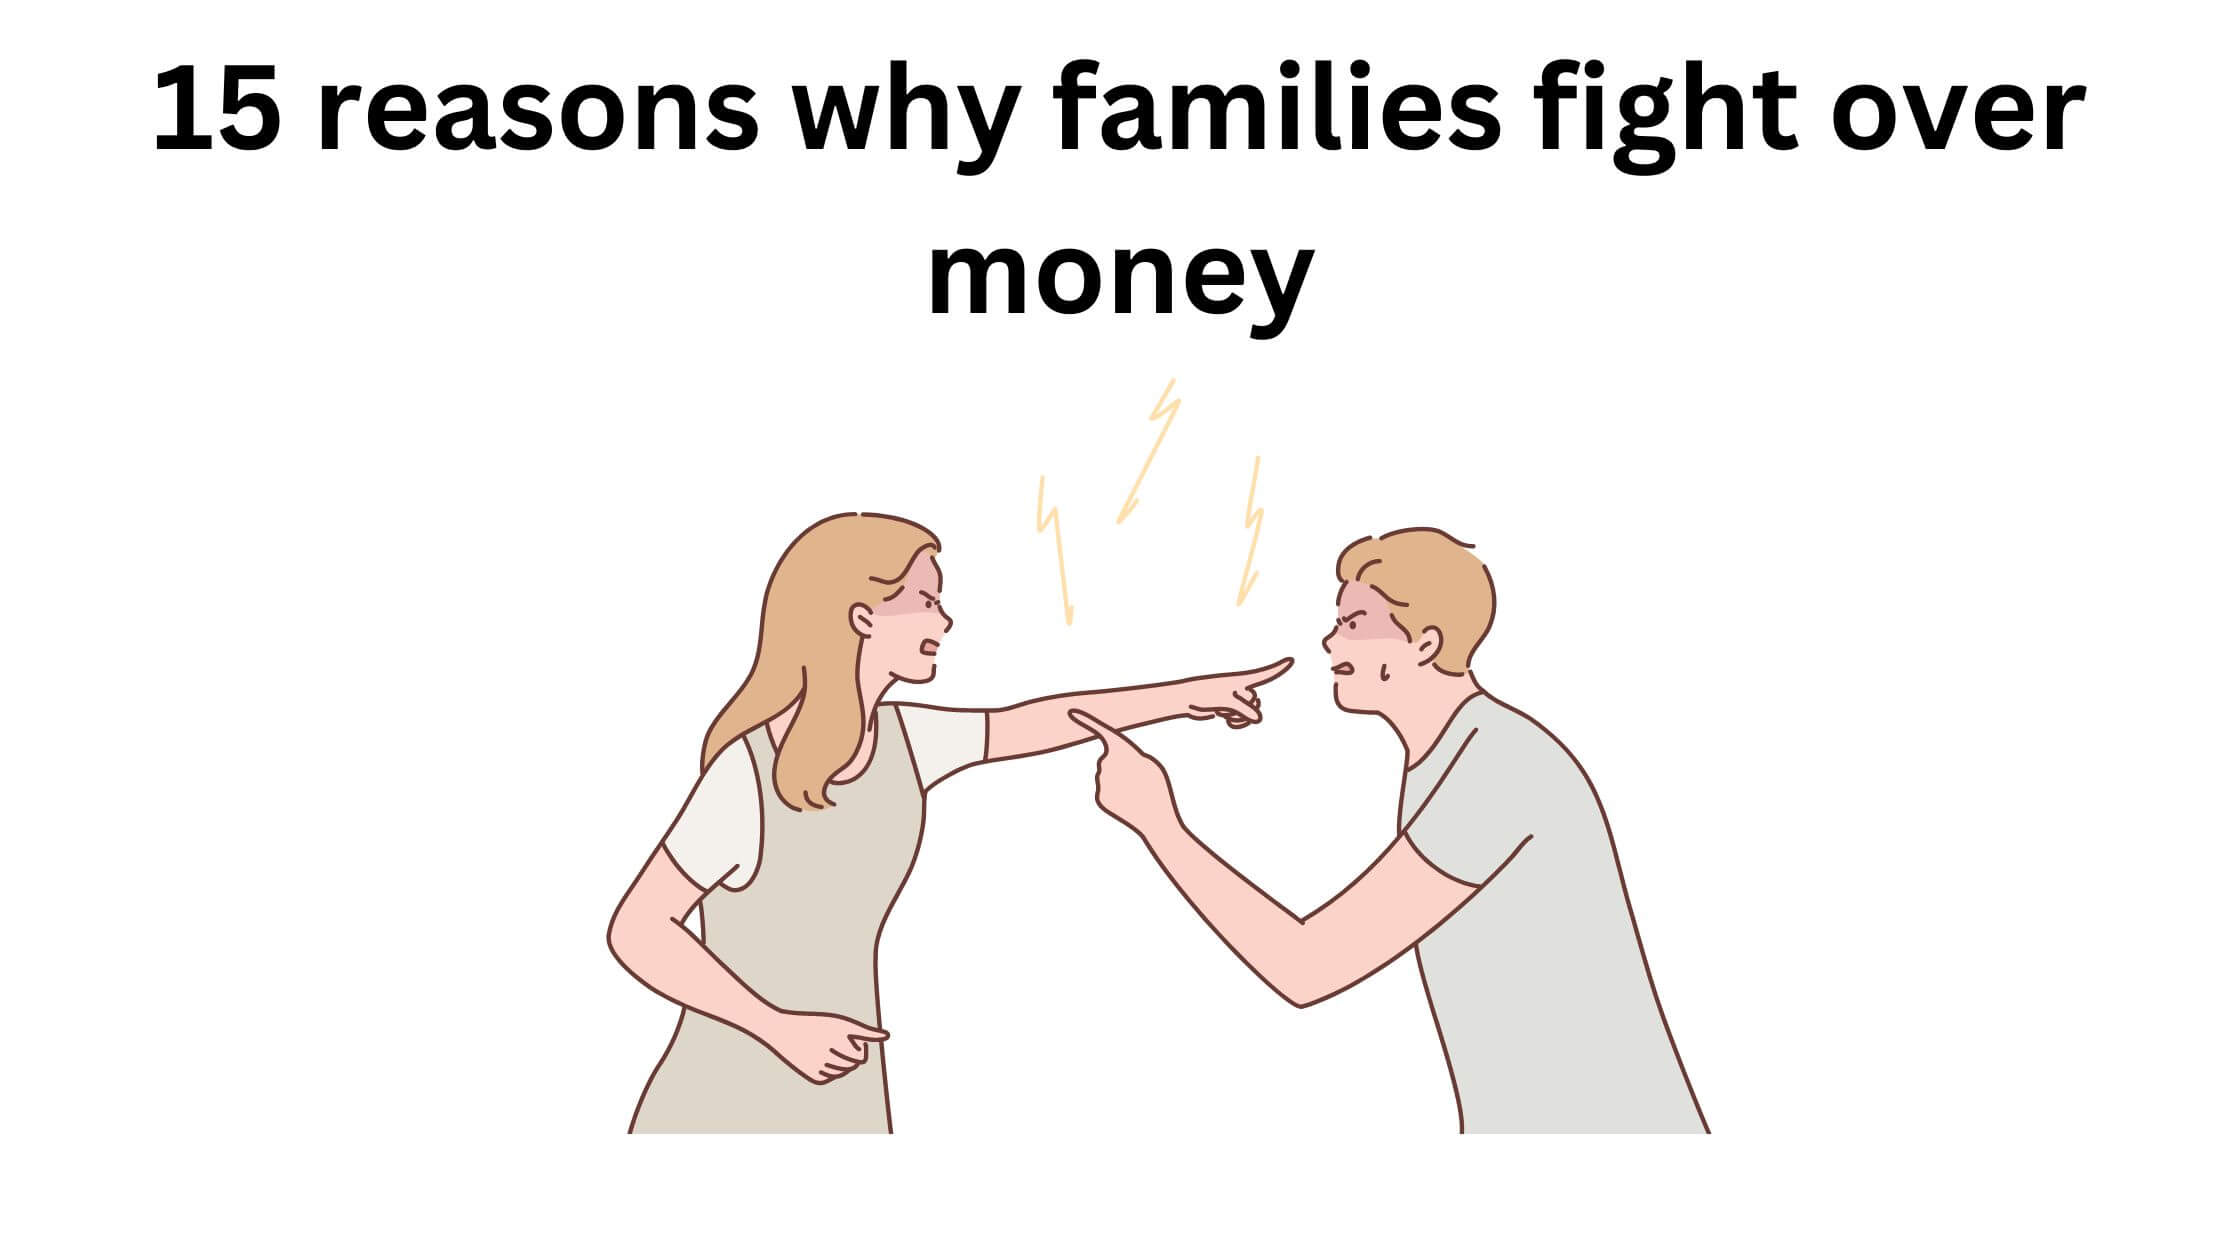 Why families fight over money